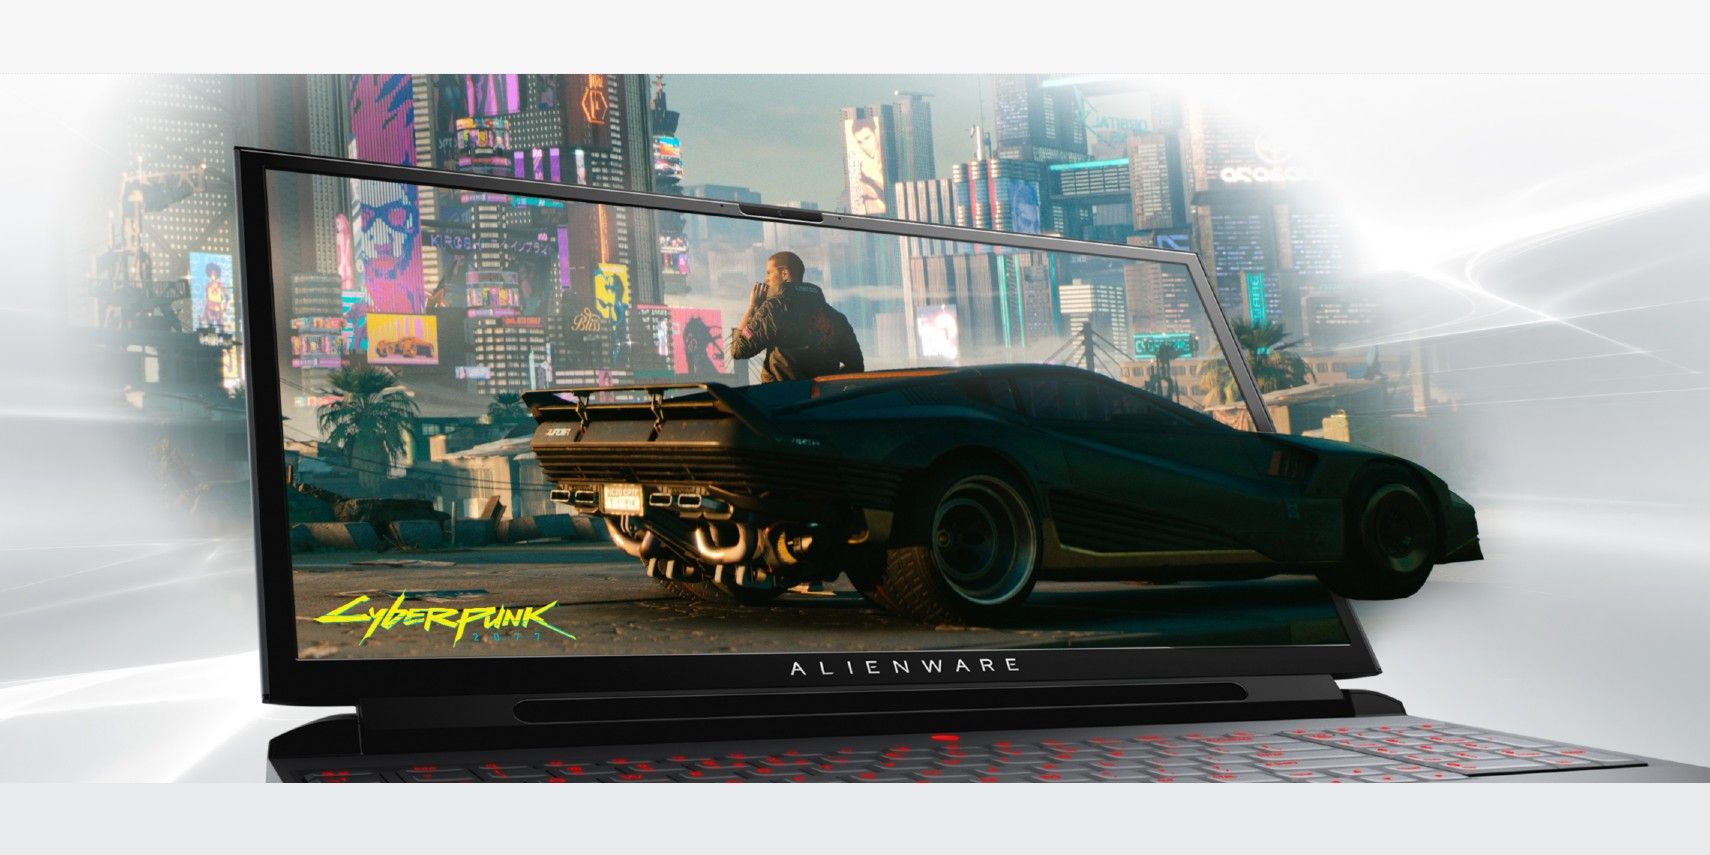 What's The Most Powerful Gaming Laptop In The World?